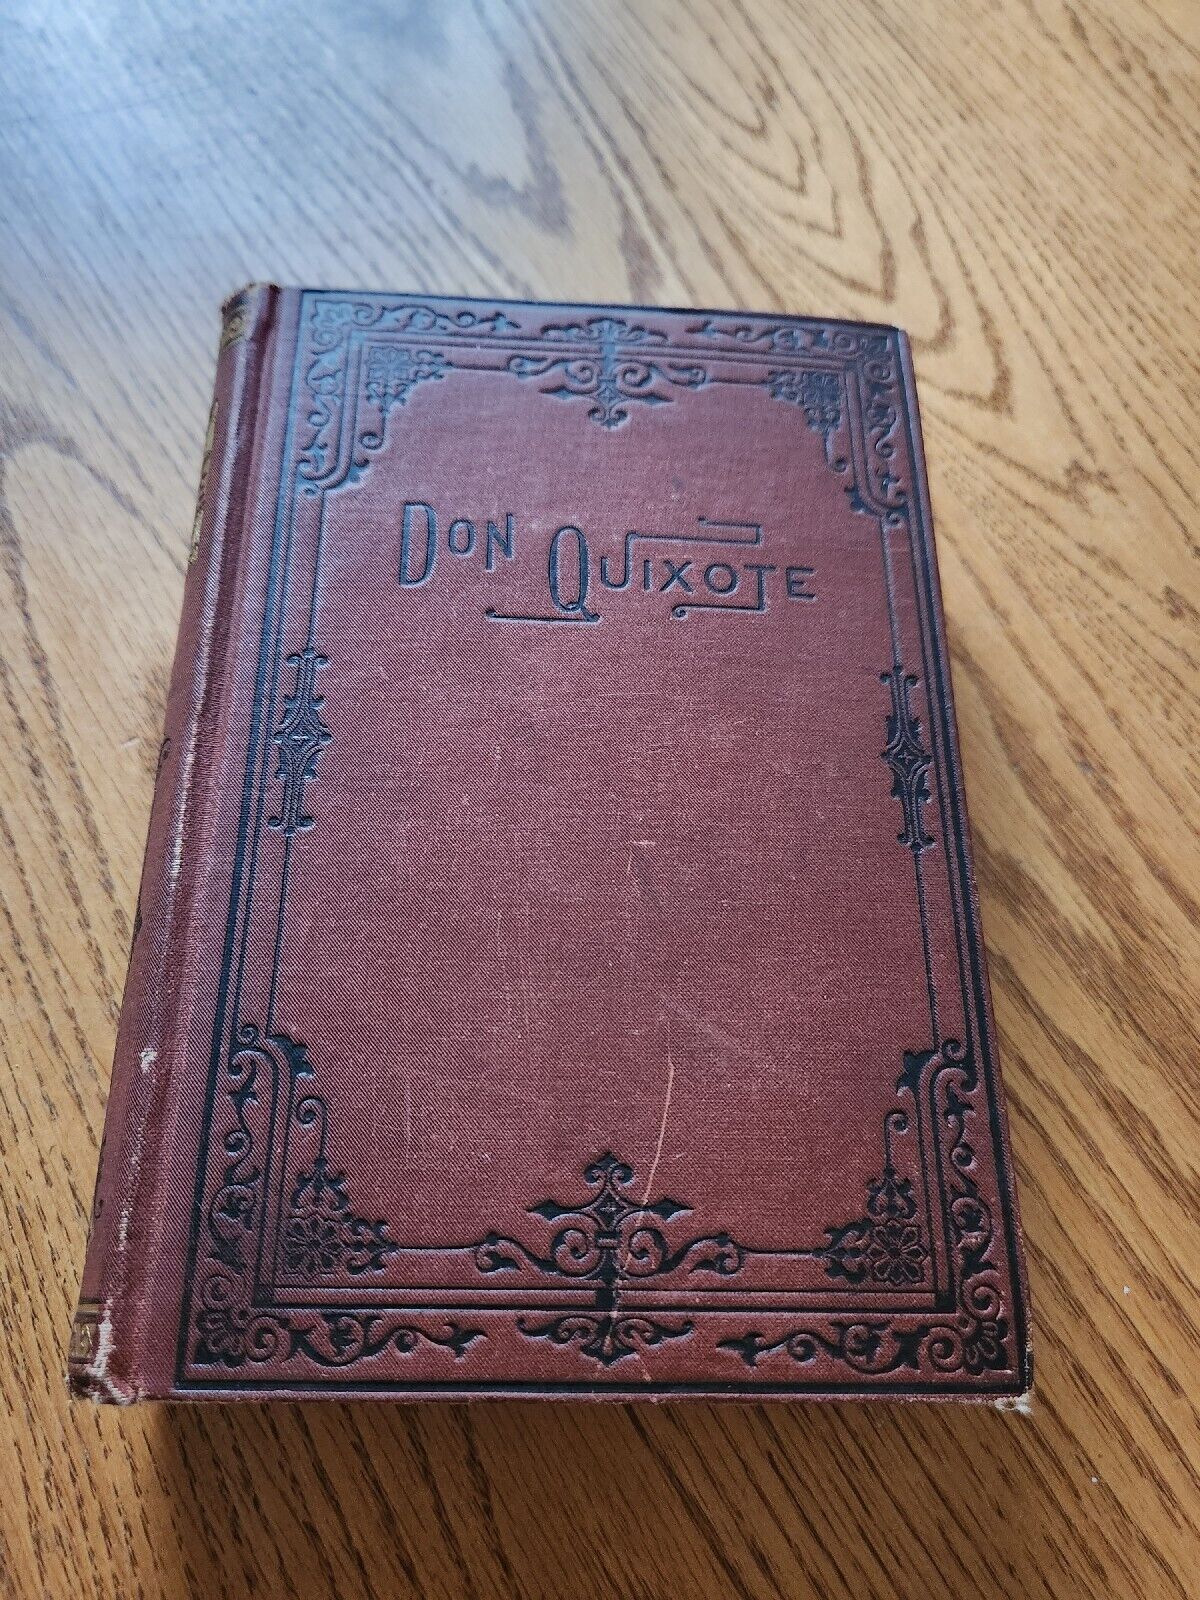 ANTIQUE VINTAGE THE ADVENTURES OF DON QUIXOTE BOOK BY CHARLES Jervas